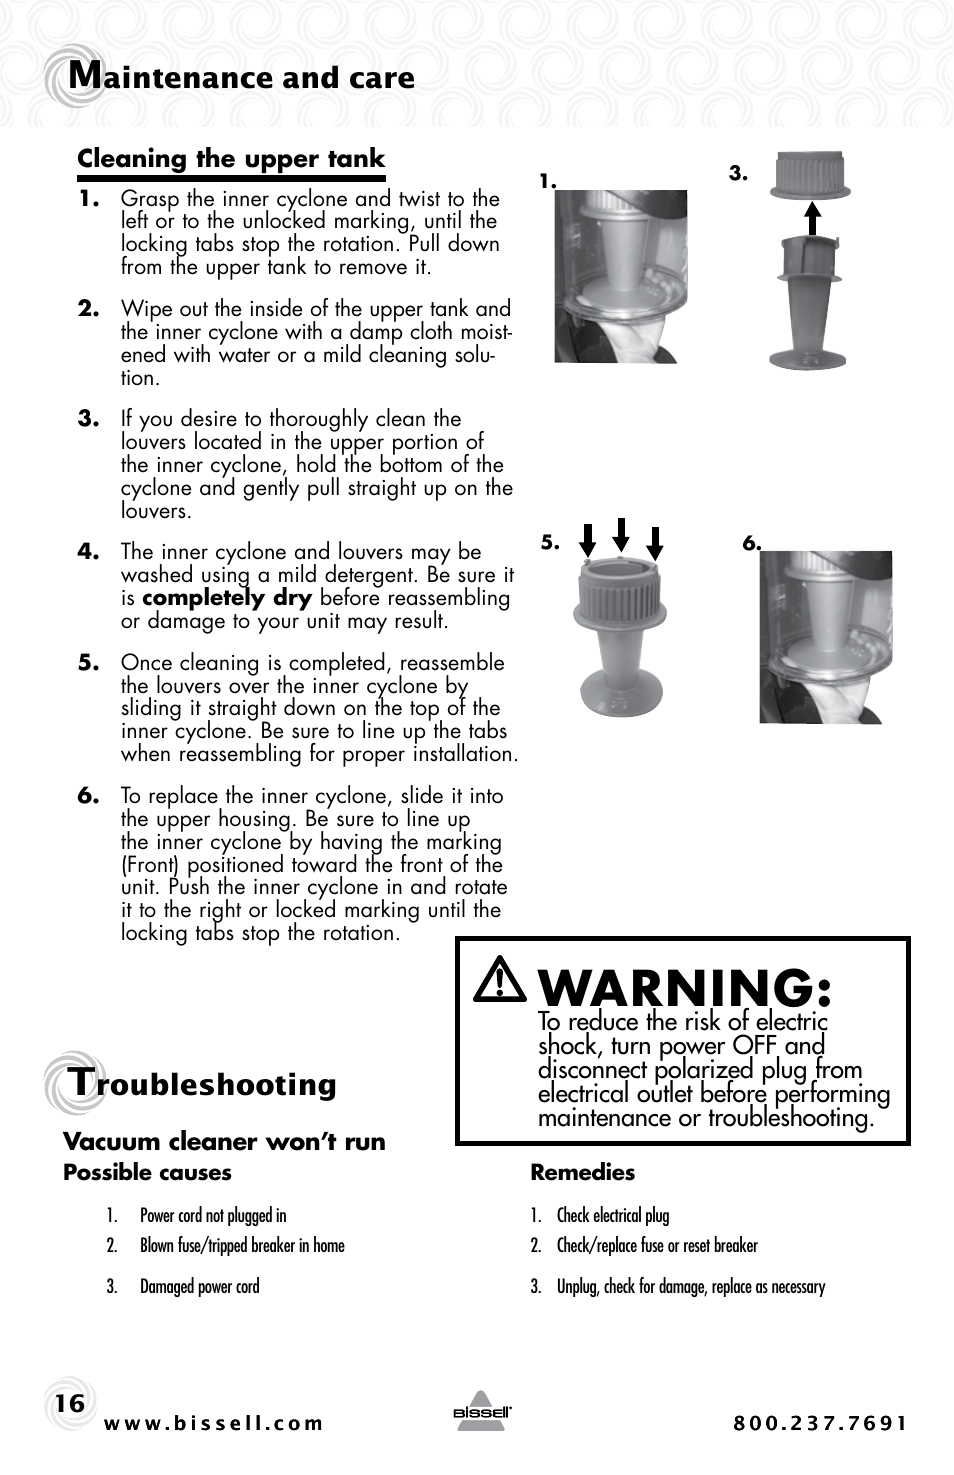 Warning, Aintenance and care, Roubleshooting | Bissell PET HAIR ERASER 3920 User Manual | Page 16 / 20